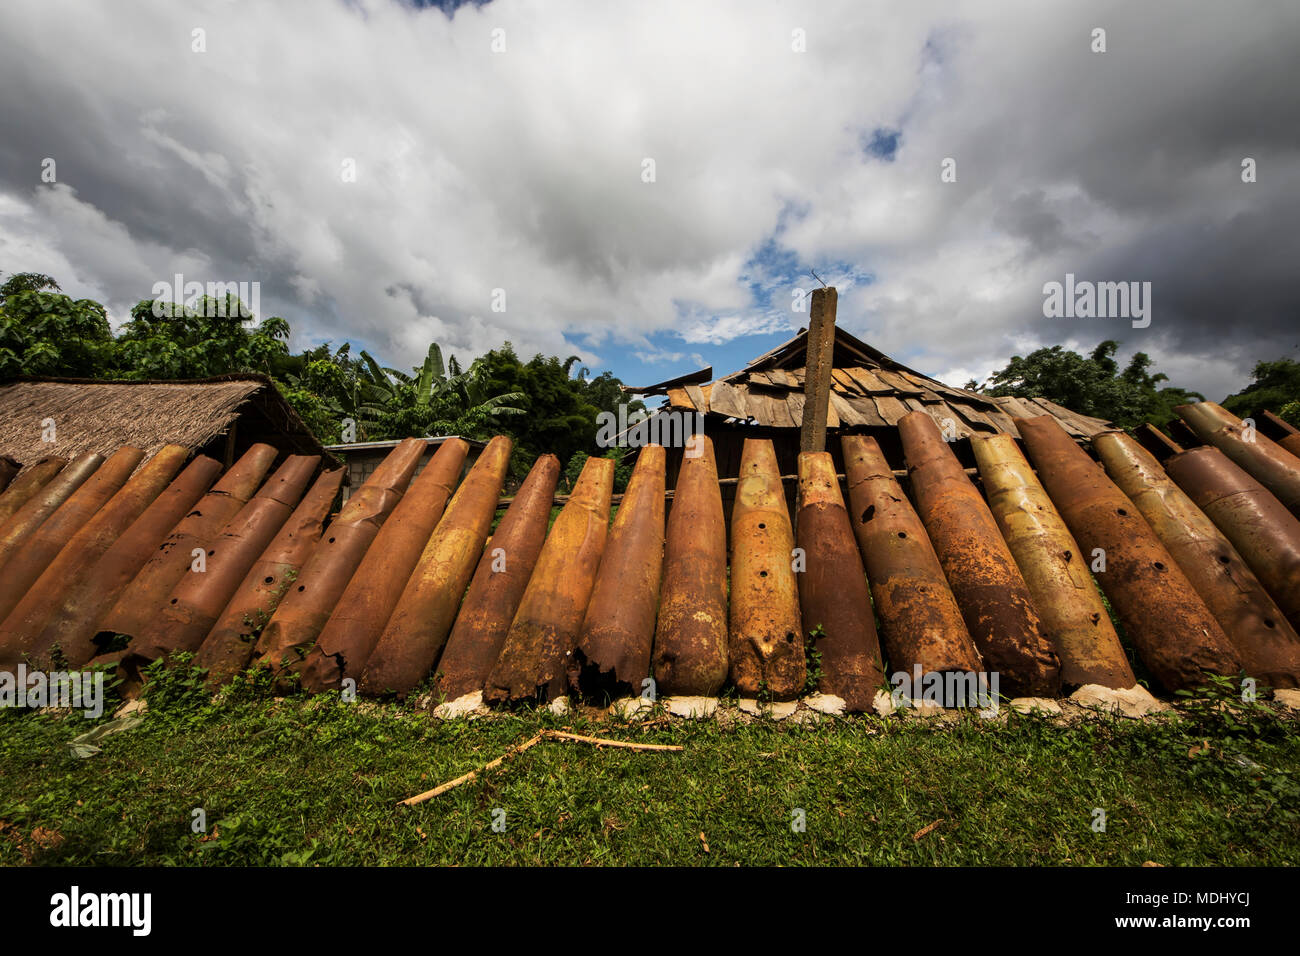 Wall made from bomb casings in Na Kam Peng, also called Bomb Village; Na Kam Peng, Xiangkhouang, Laos Stock Photo